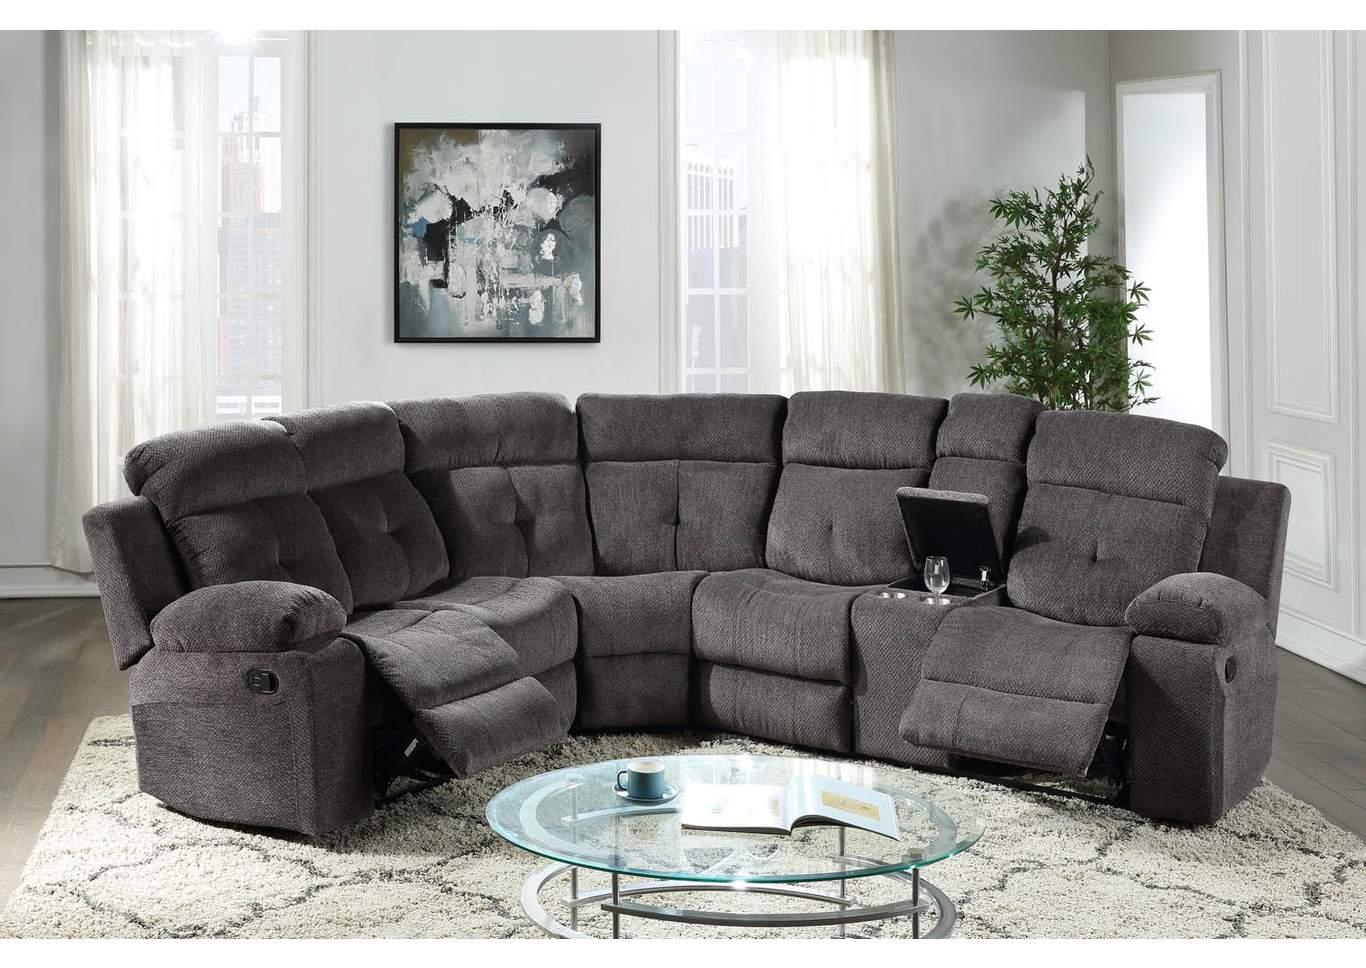 

    
Galaxy Home Furniture ARIZONA Sectional Recliner Gray GHF-808857682642
